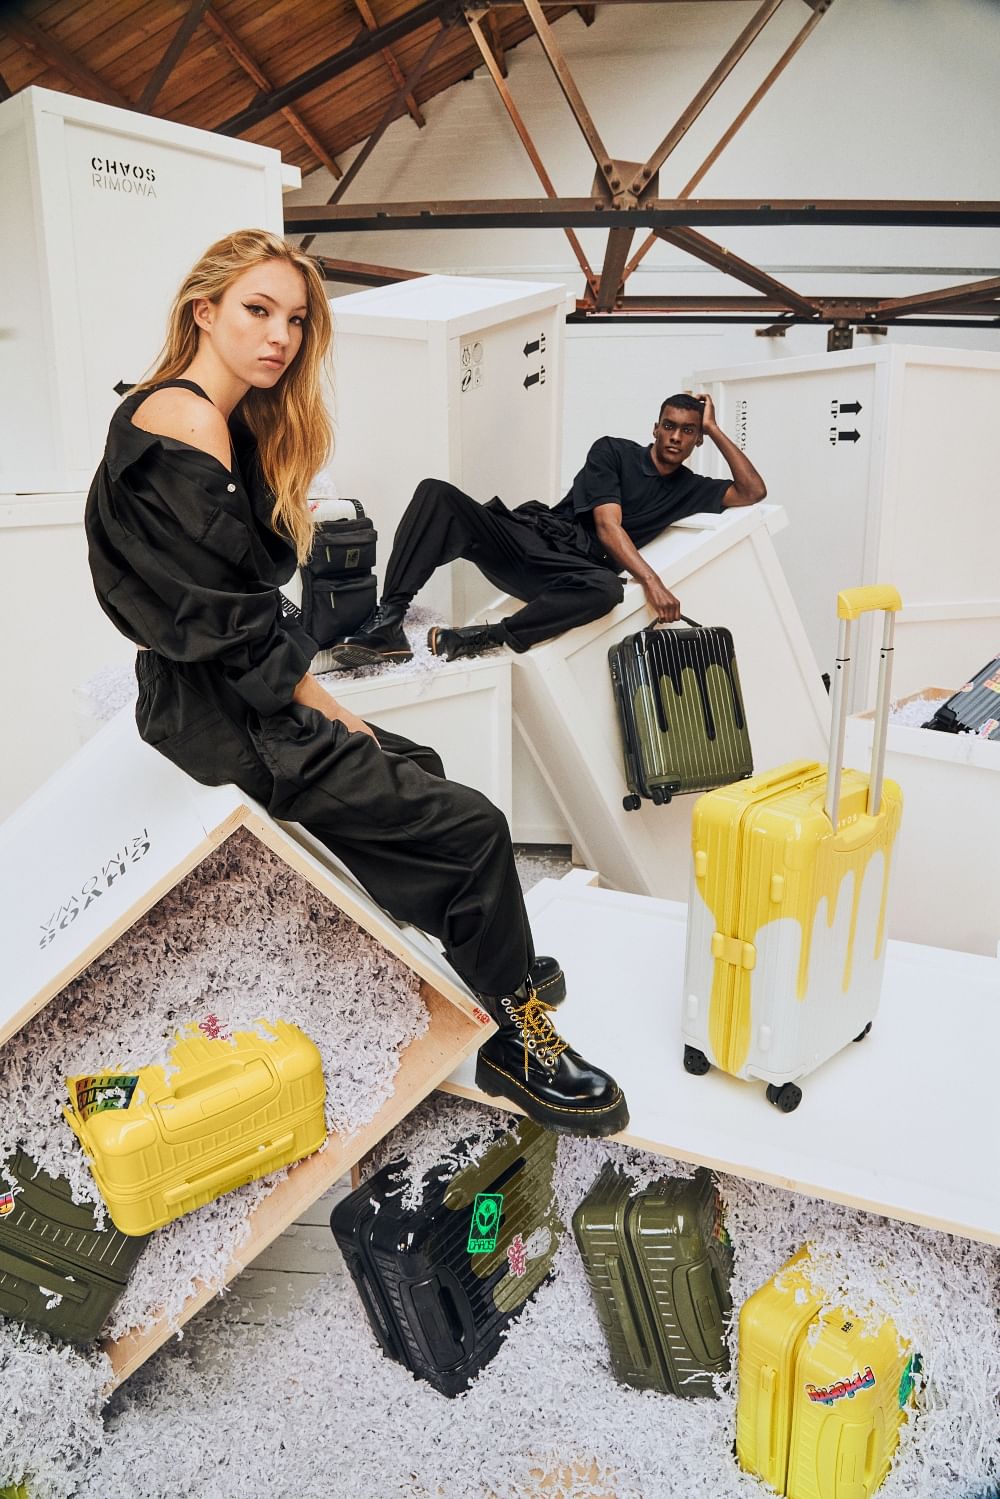 Rimowa's New Campaign Lets Us See How Our Favorite Celebrities